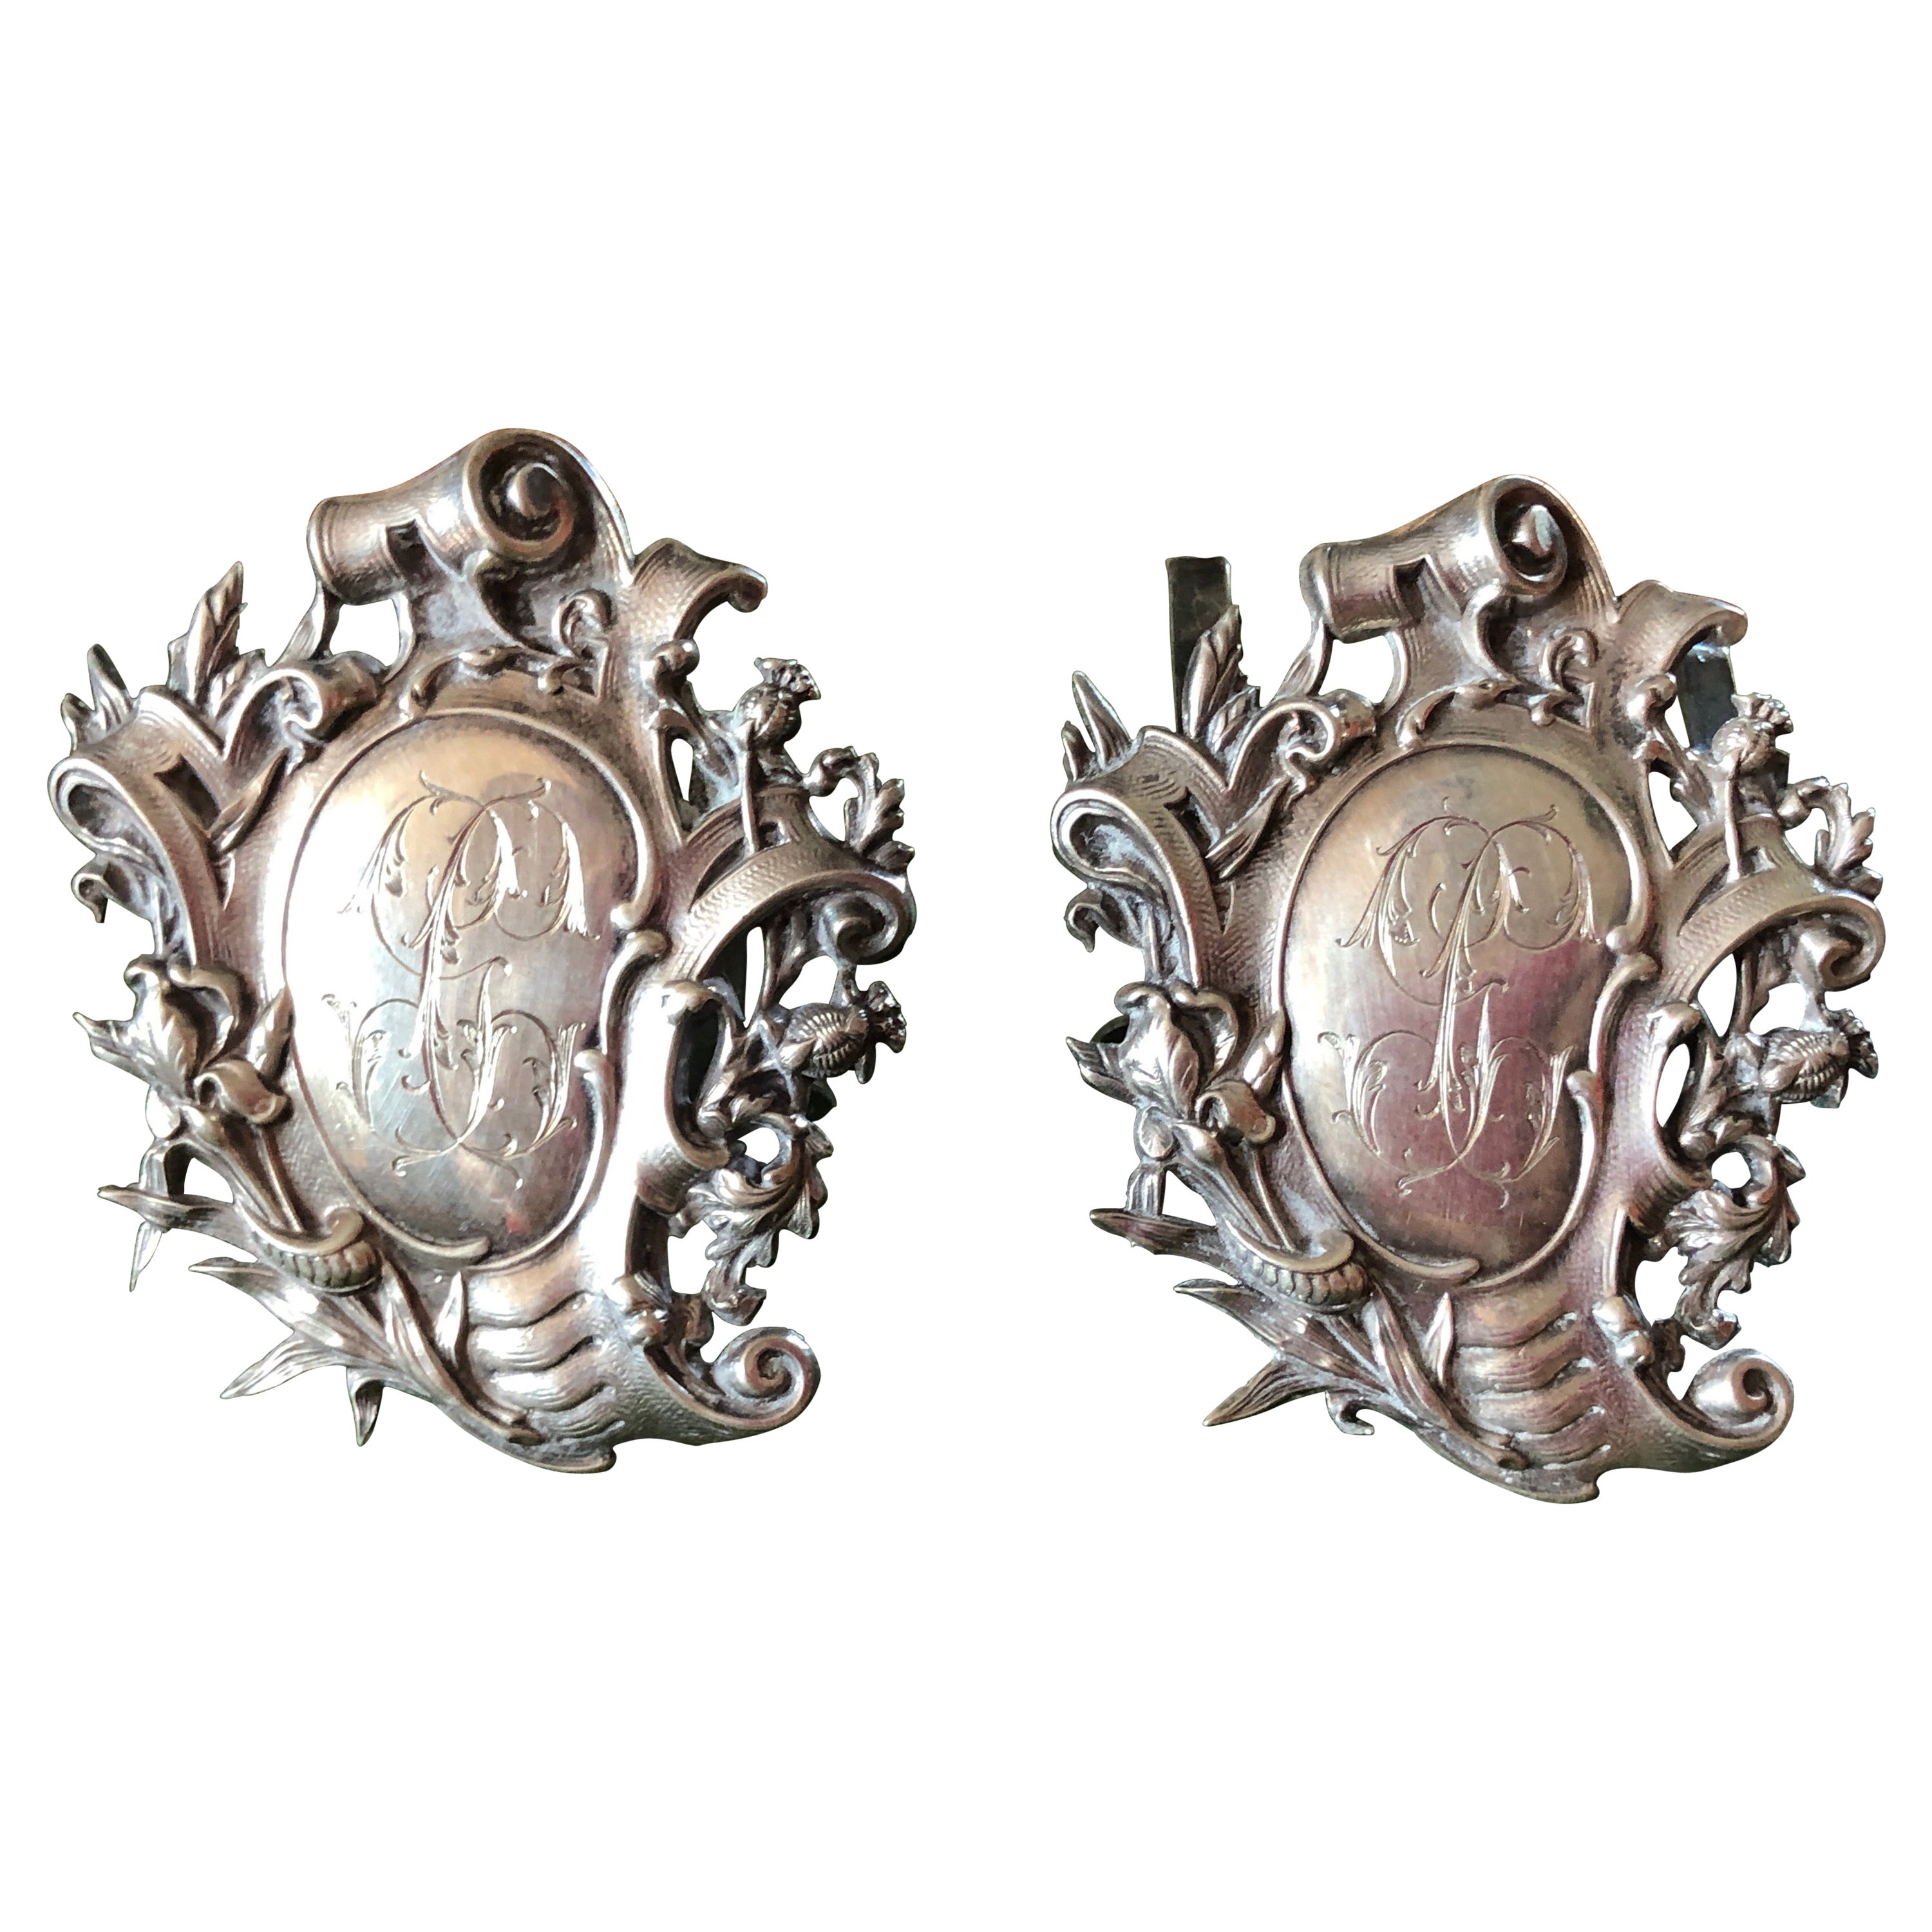 19th Century Pair of Silver Menus Holders with Medallion and Floral Decoration